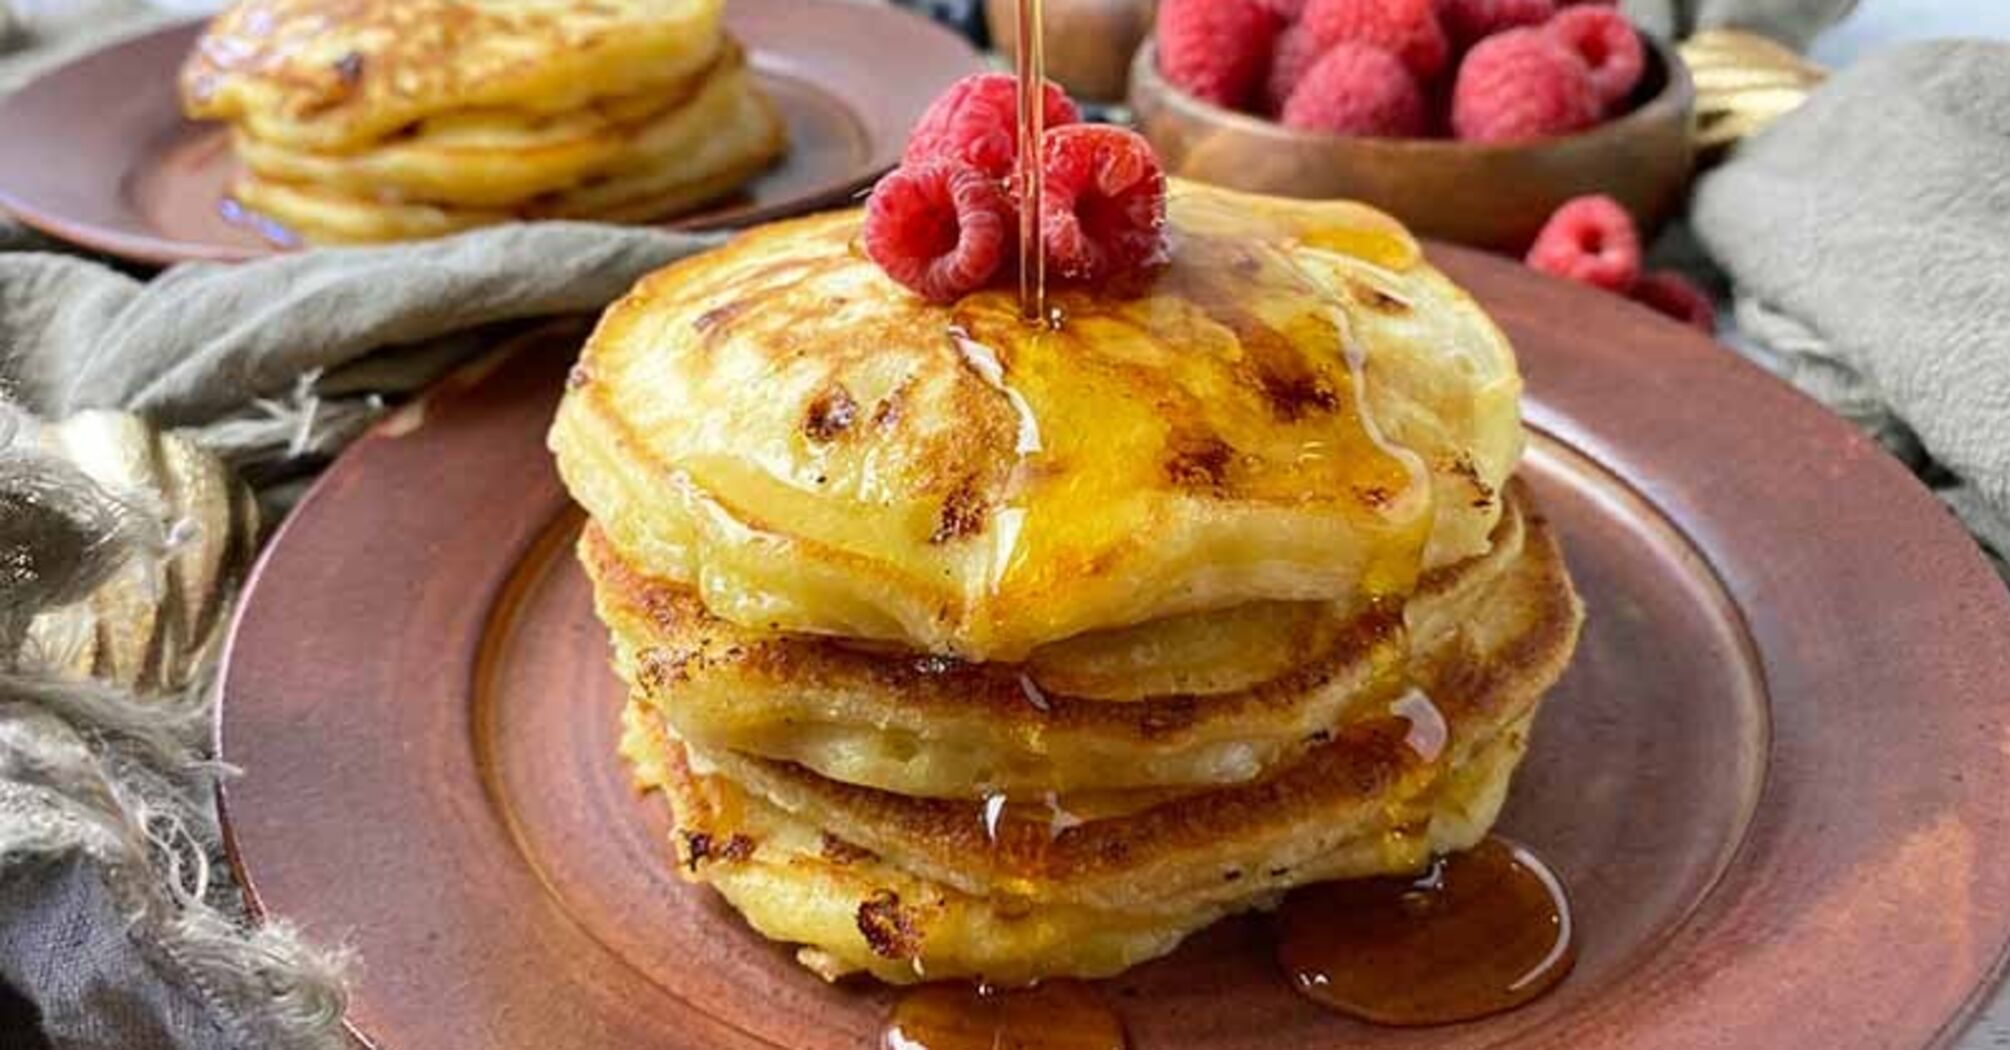 Healthy pancakes with dried fruit for a snack: what flour is better to cook with